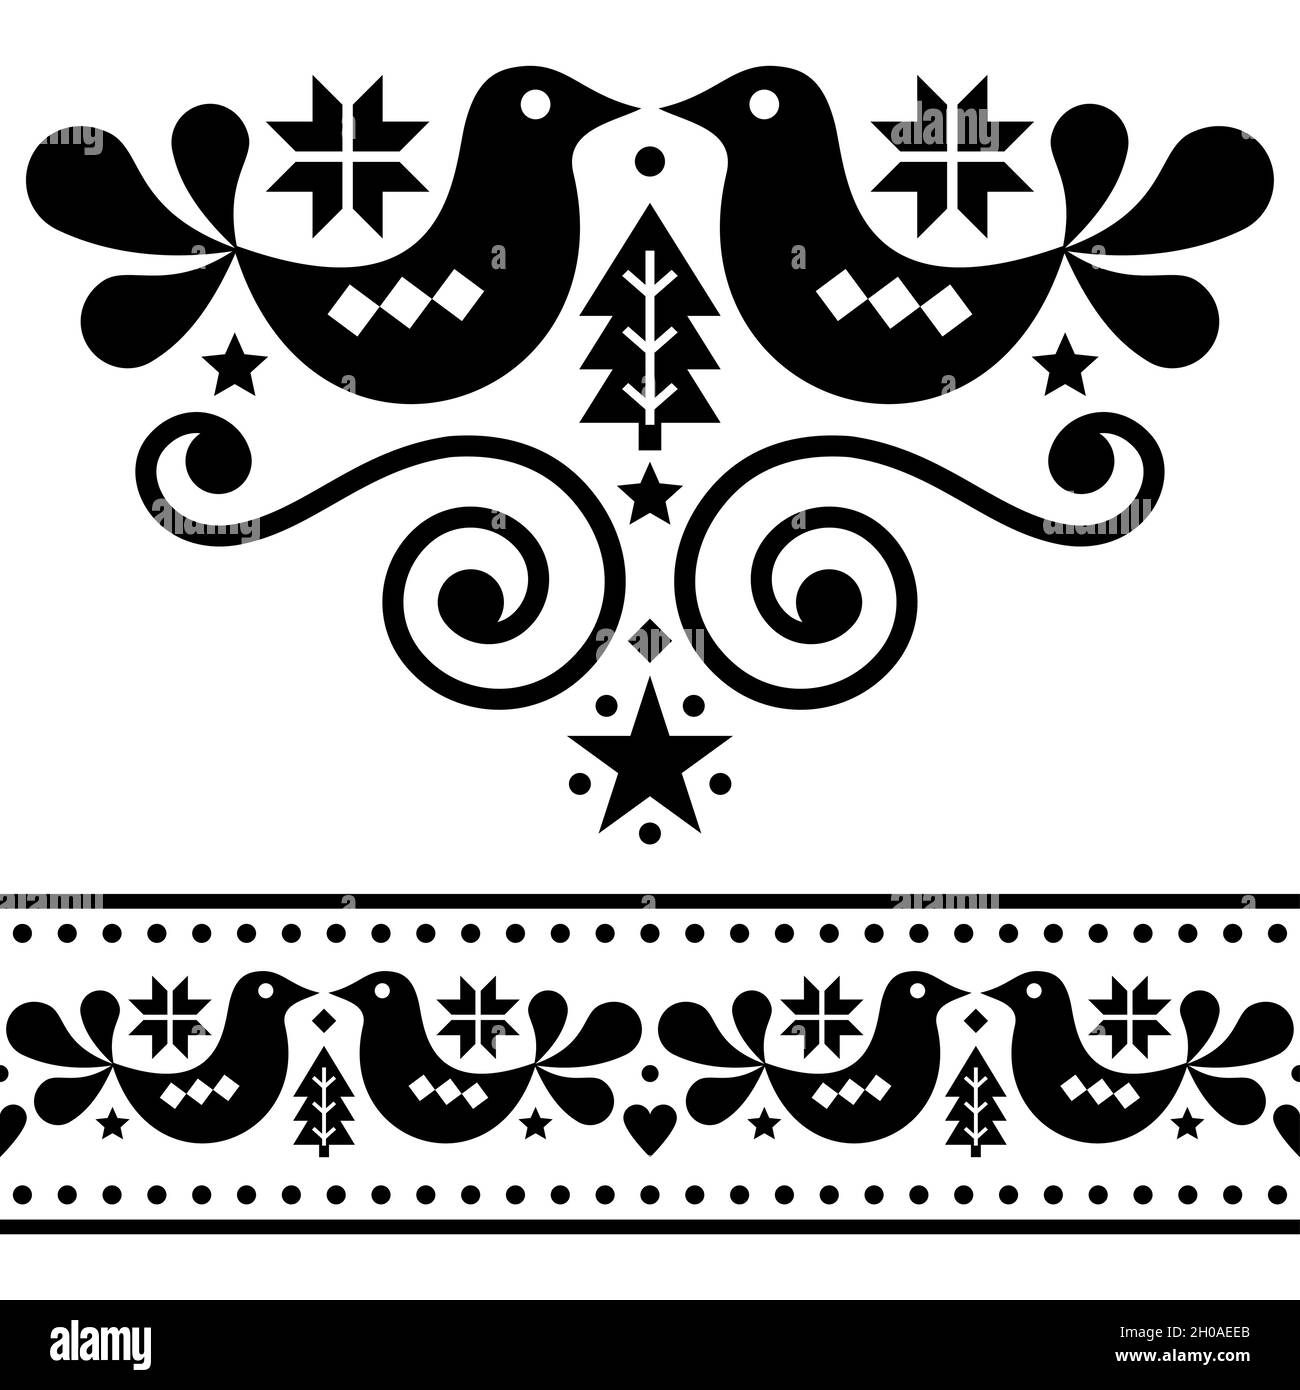 Scandinavian Christmas folk vector design elements, cute floral design with birds, pine trees and snowflakes in black on white background Stock Vector